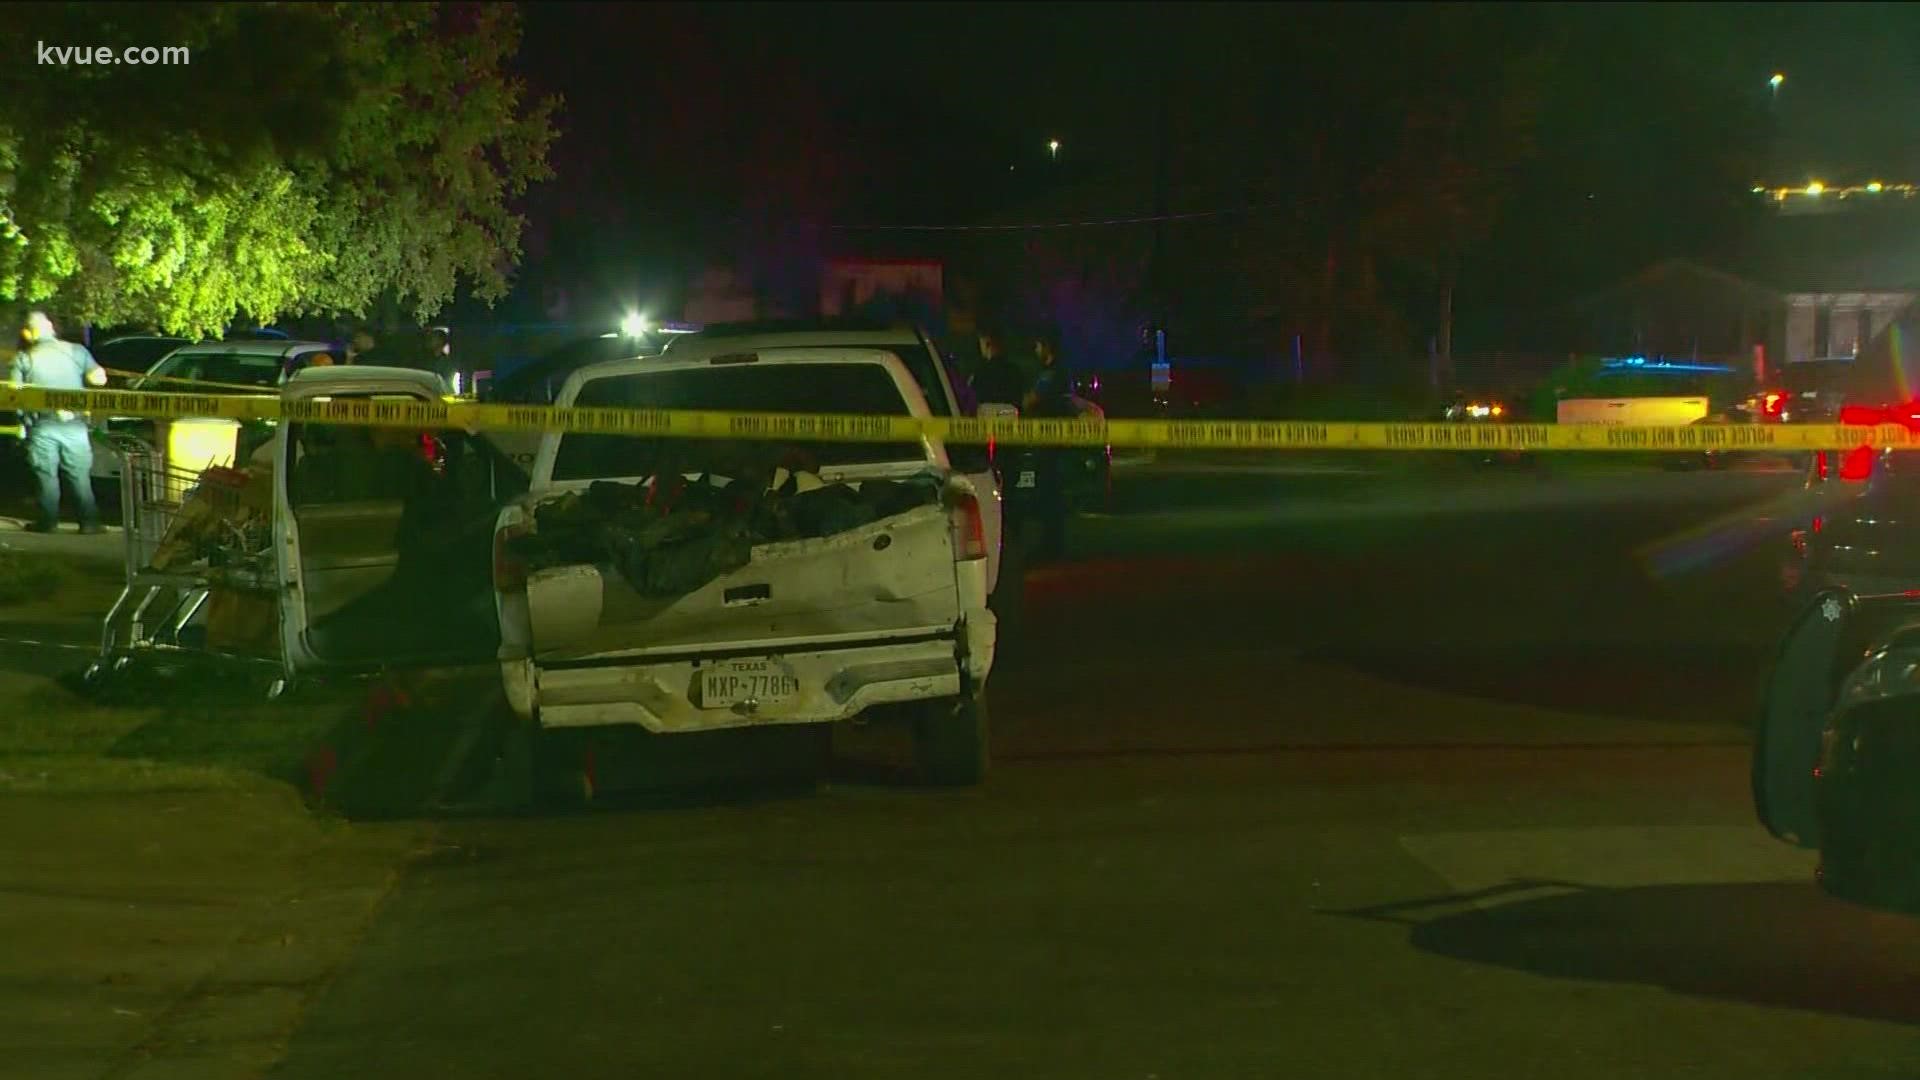 Police are investigating a suspicious death in East Austin early Monday morning.